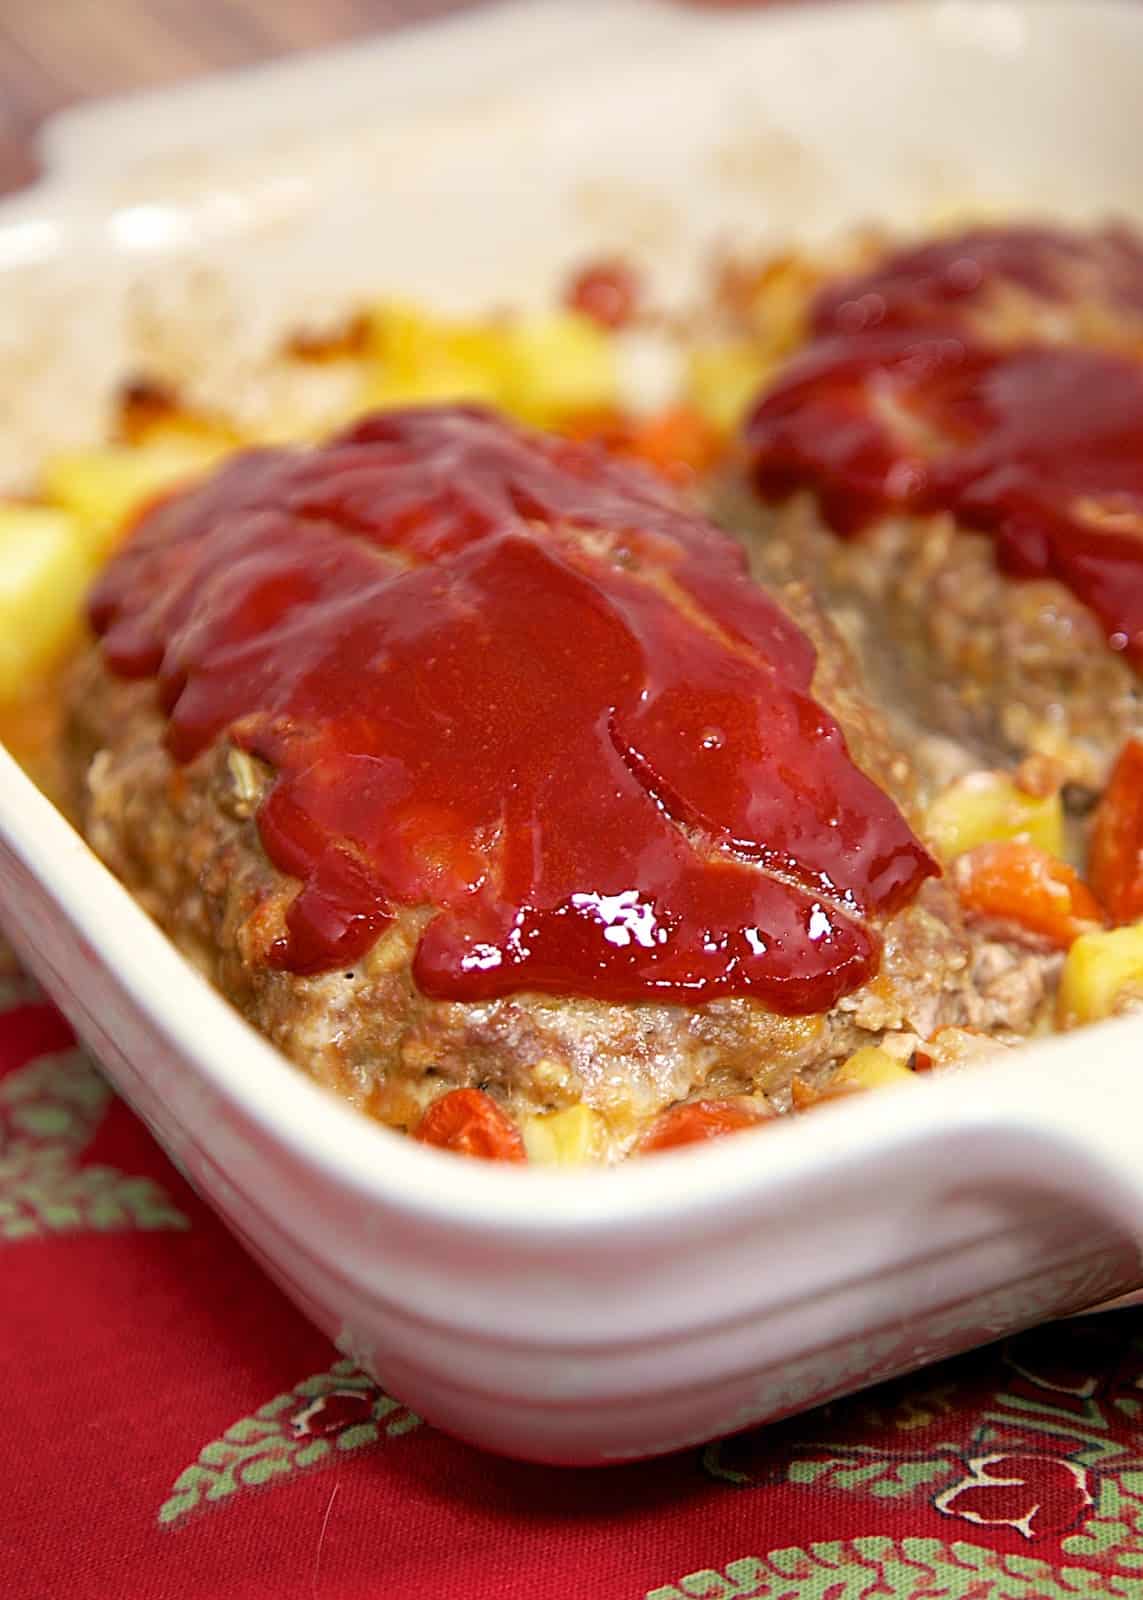 Mom's Meatloaf Recipe - comfort food at its best! This recipe makes 2 small loaves - serve one for dinner and serve leftovers as sandwiches for lunch the next day.